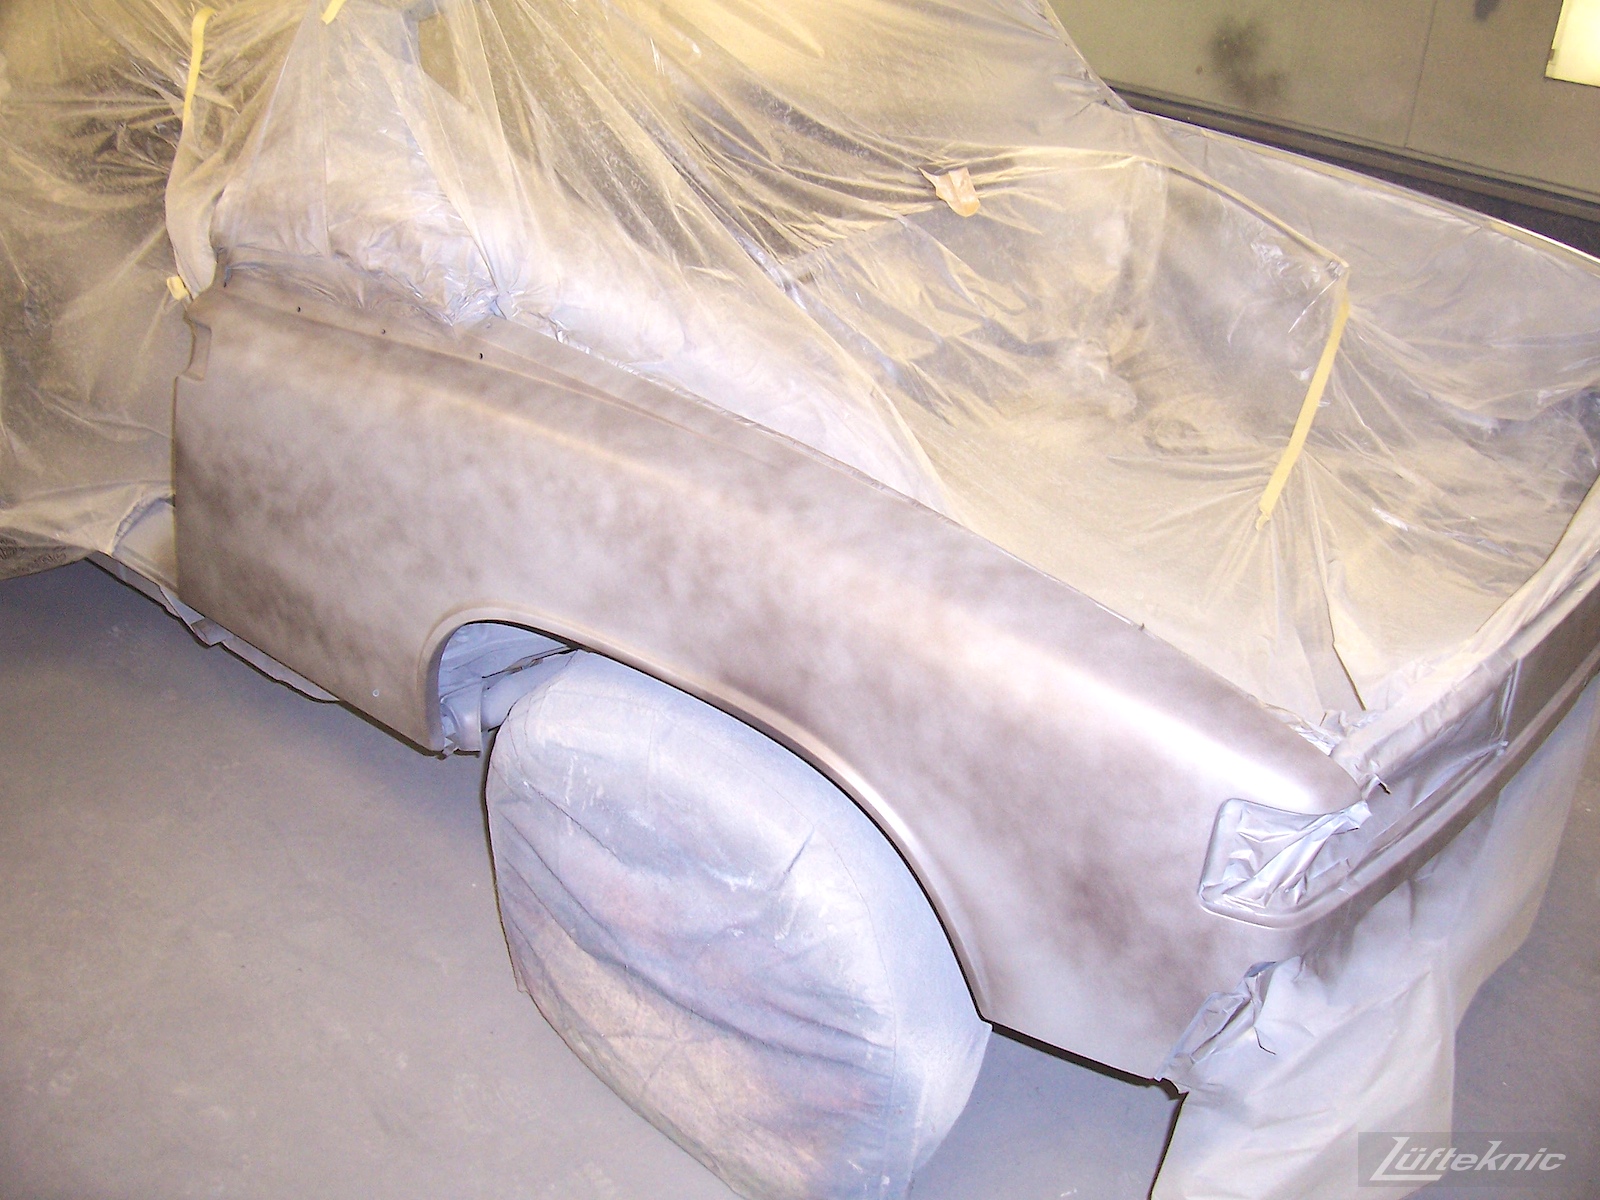 A porsche 914 with primer applied to the fender while everything else is taped off.